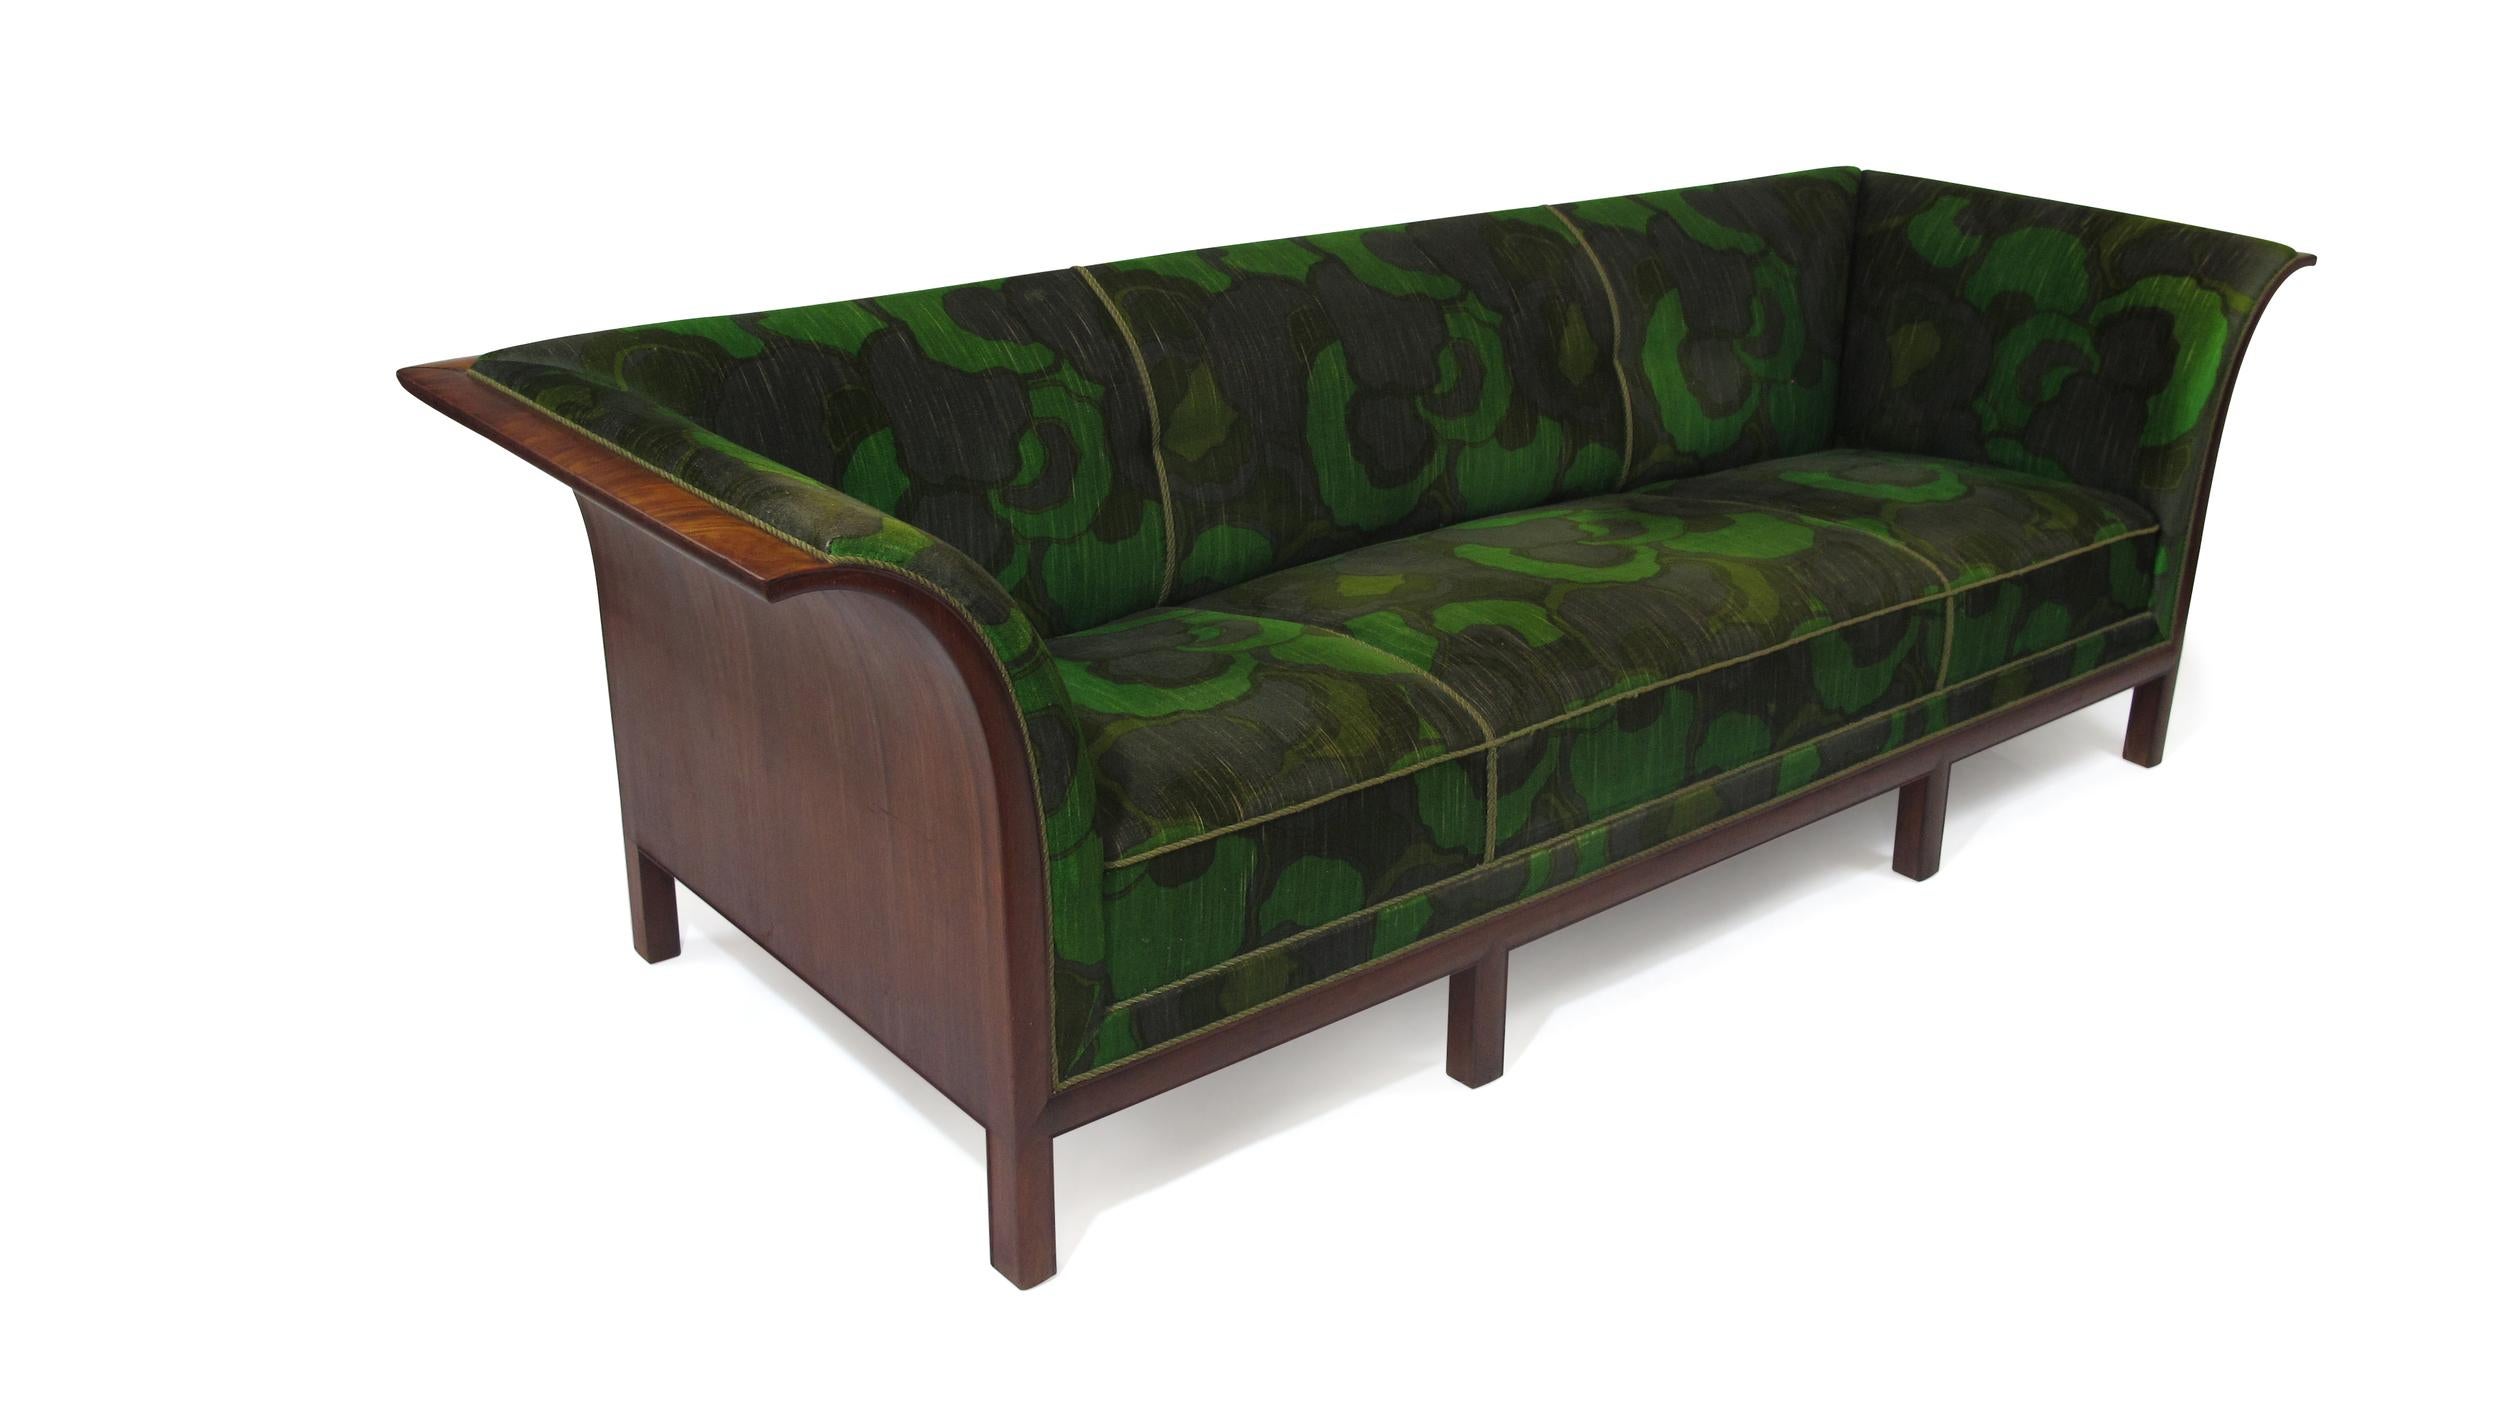 Stately sofa by Frits Henningsen, 1938, Denmark. Dramatic flared arms of flamed Cuban mahogany with eight-way hand-tied springs under seat. Reupholstered in 1960s in a green print velvet.